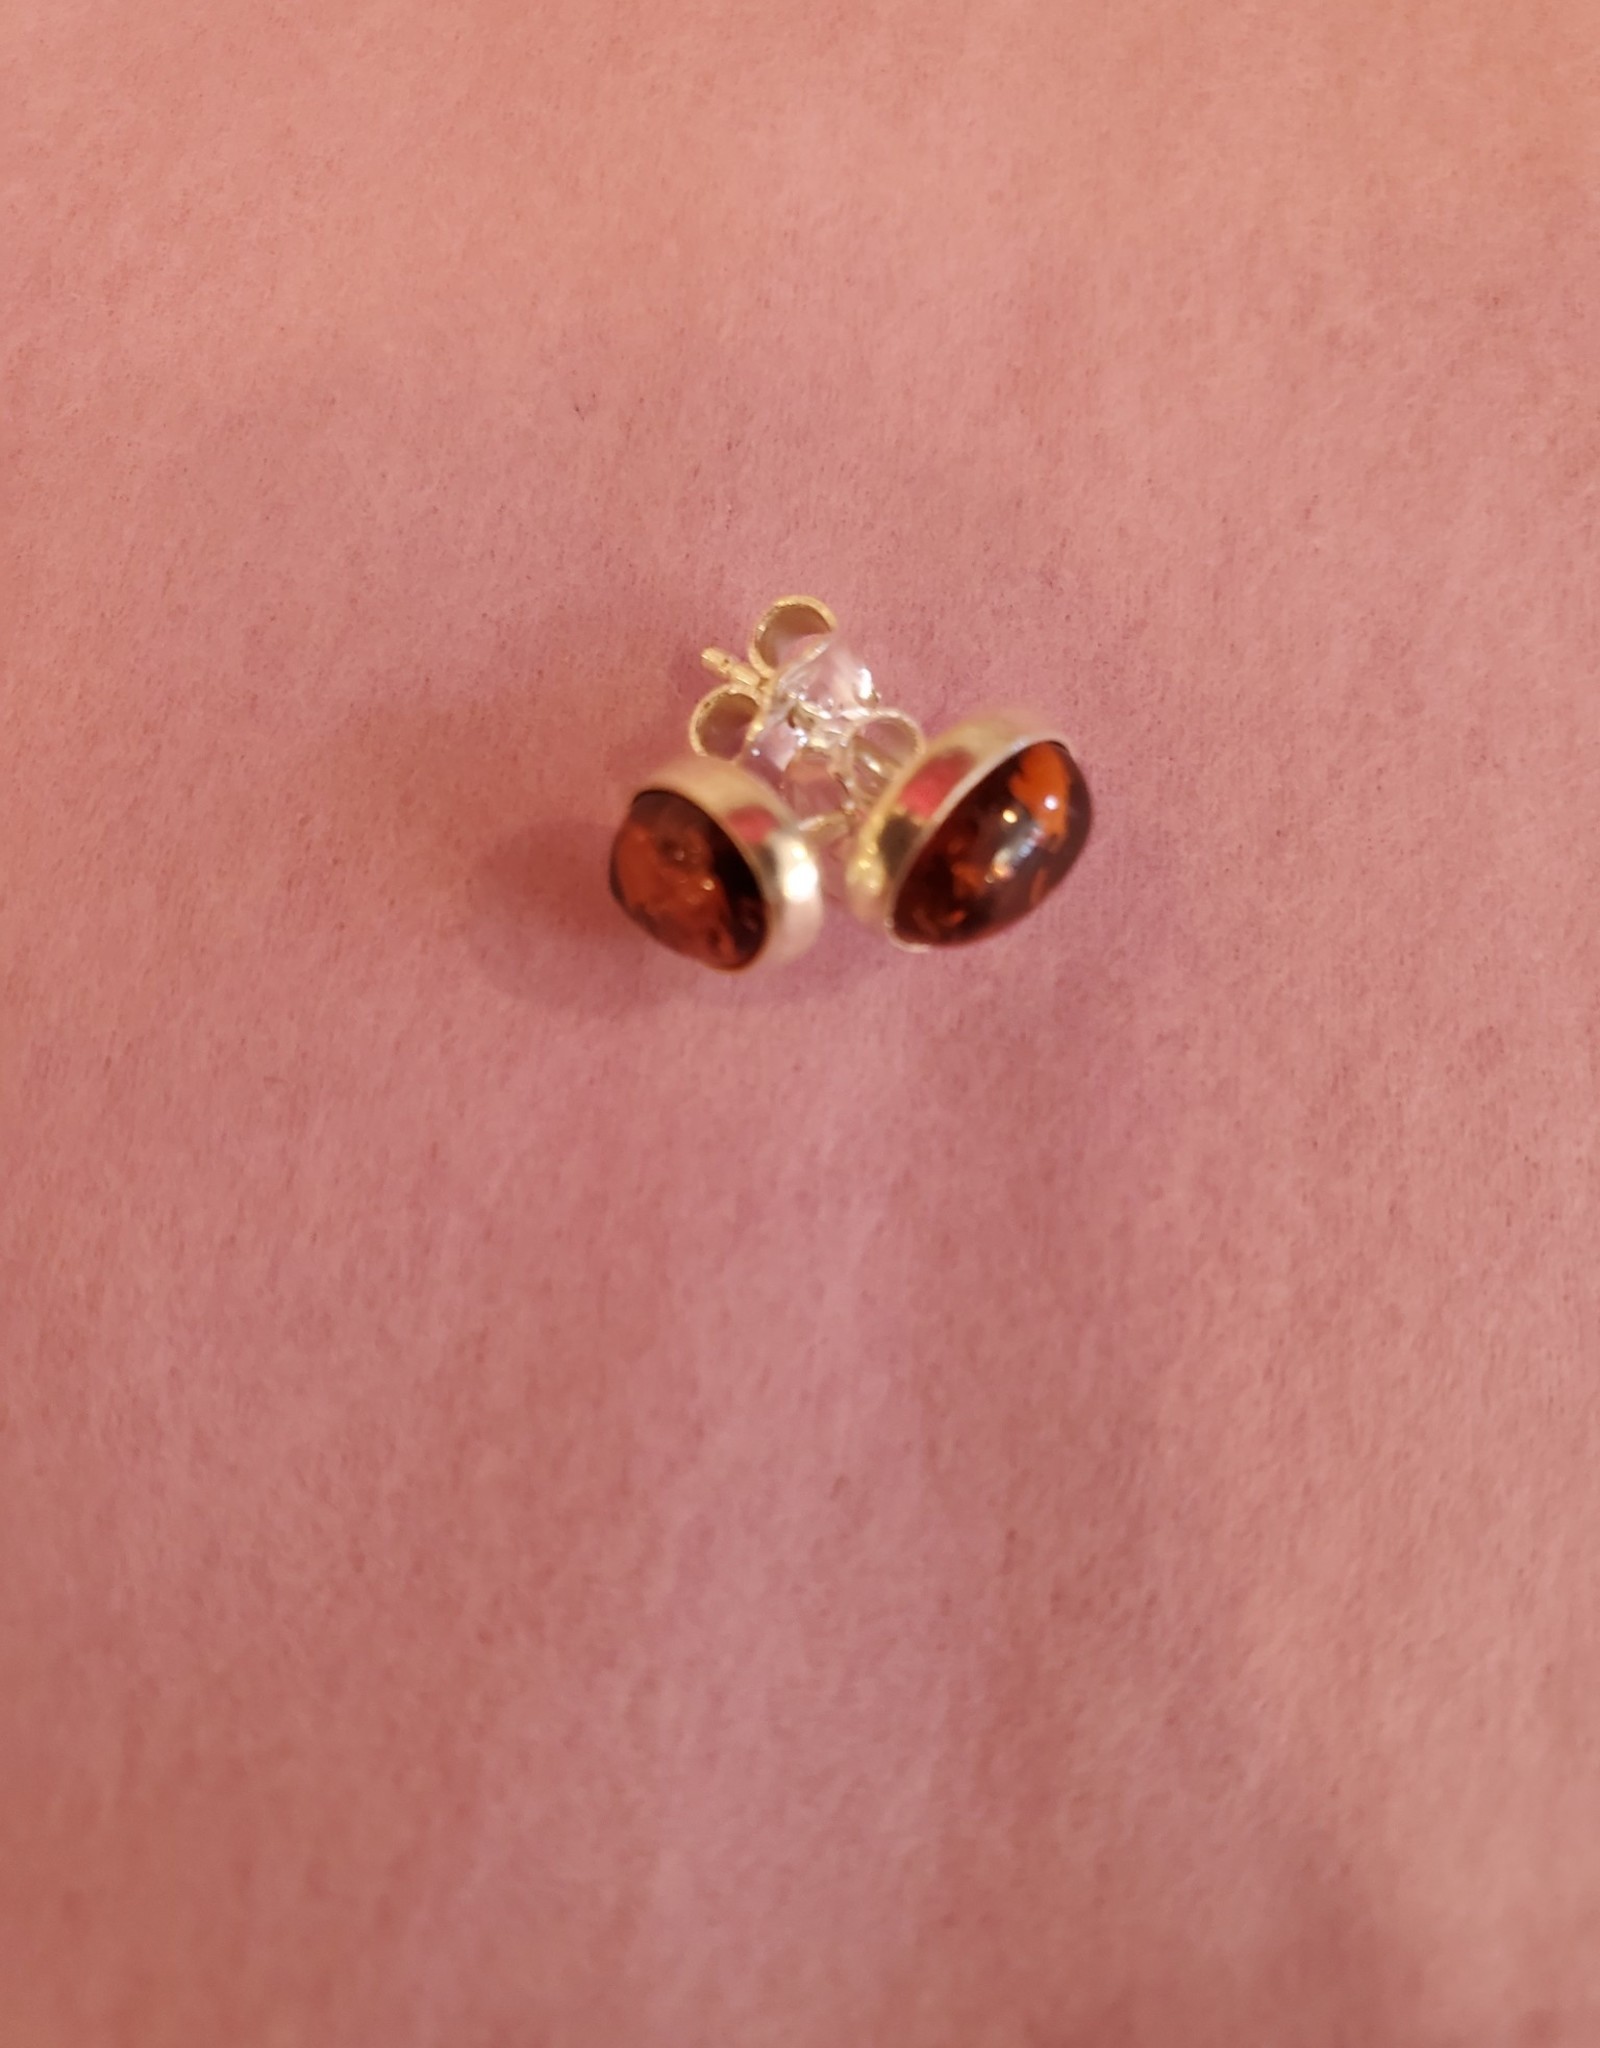 Silver Oval Shape Stud Earrings with Amber Stone